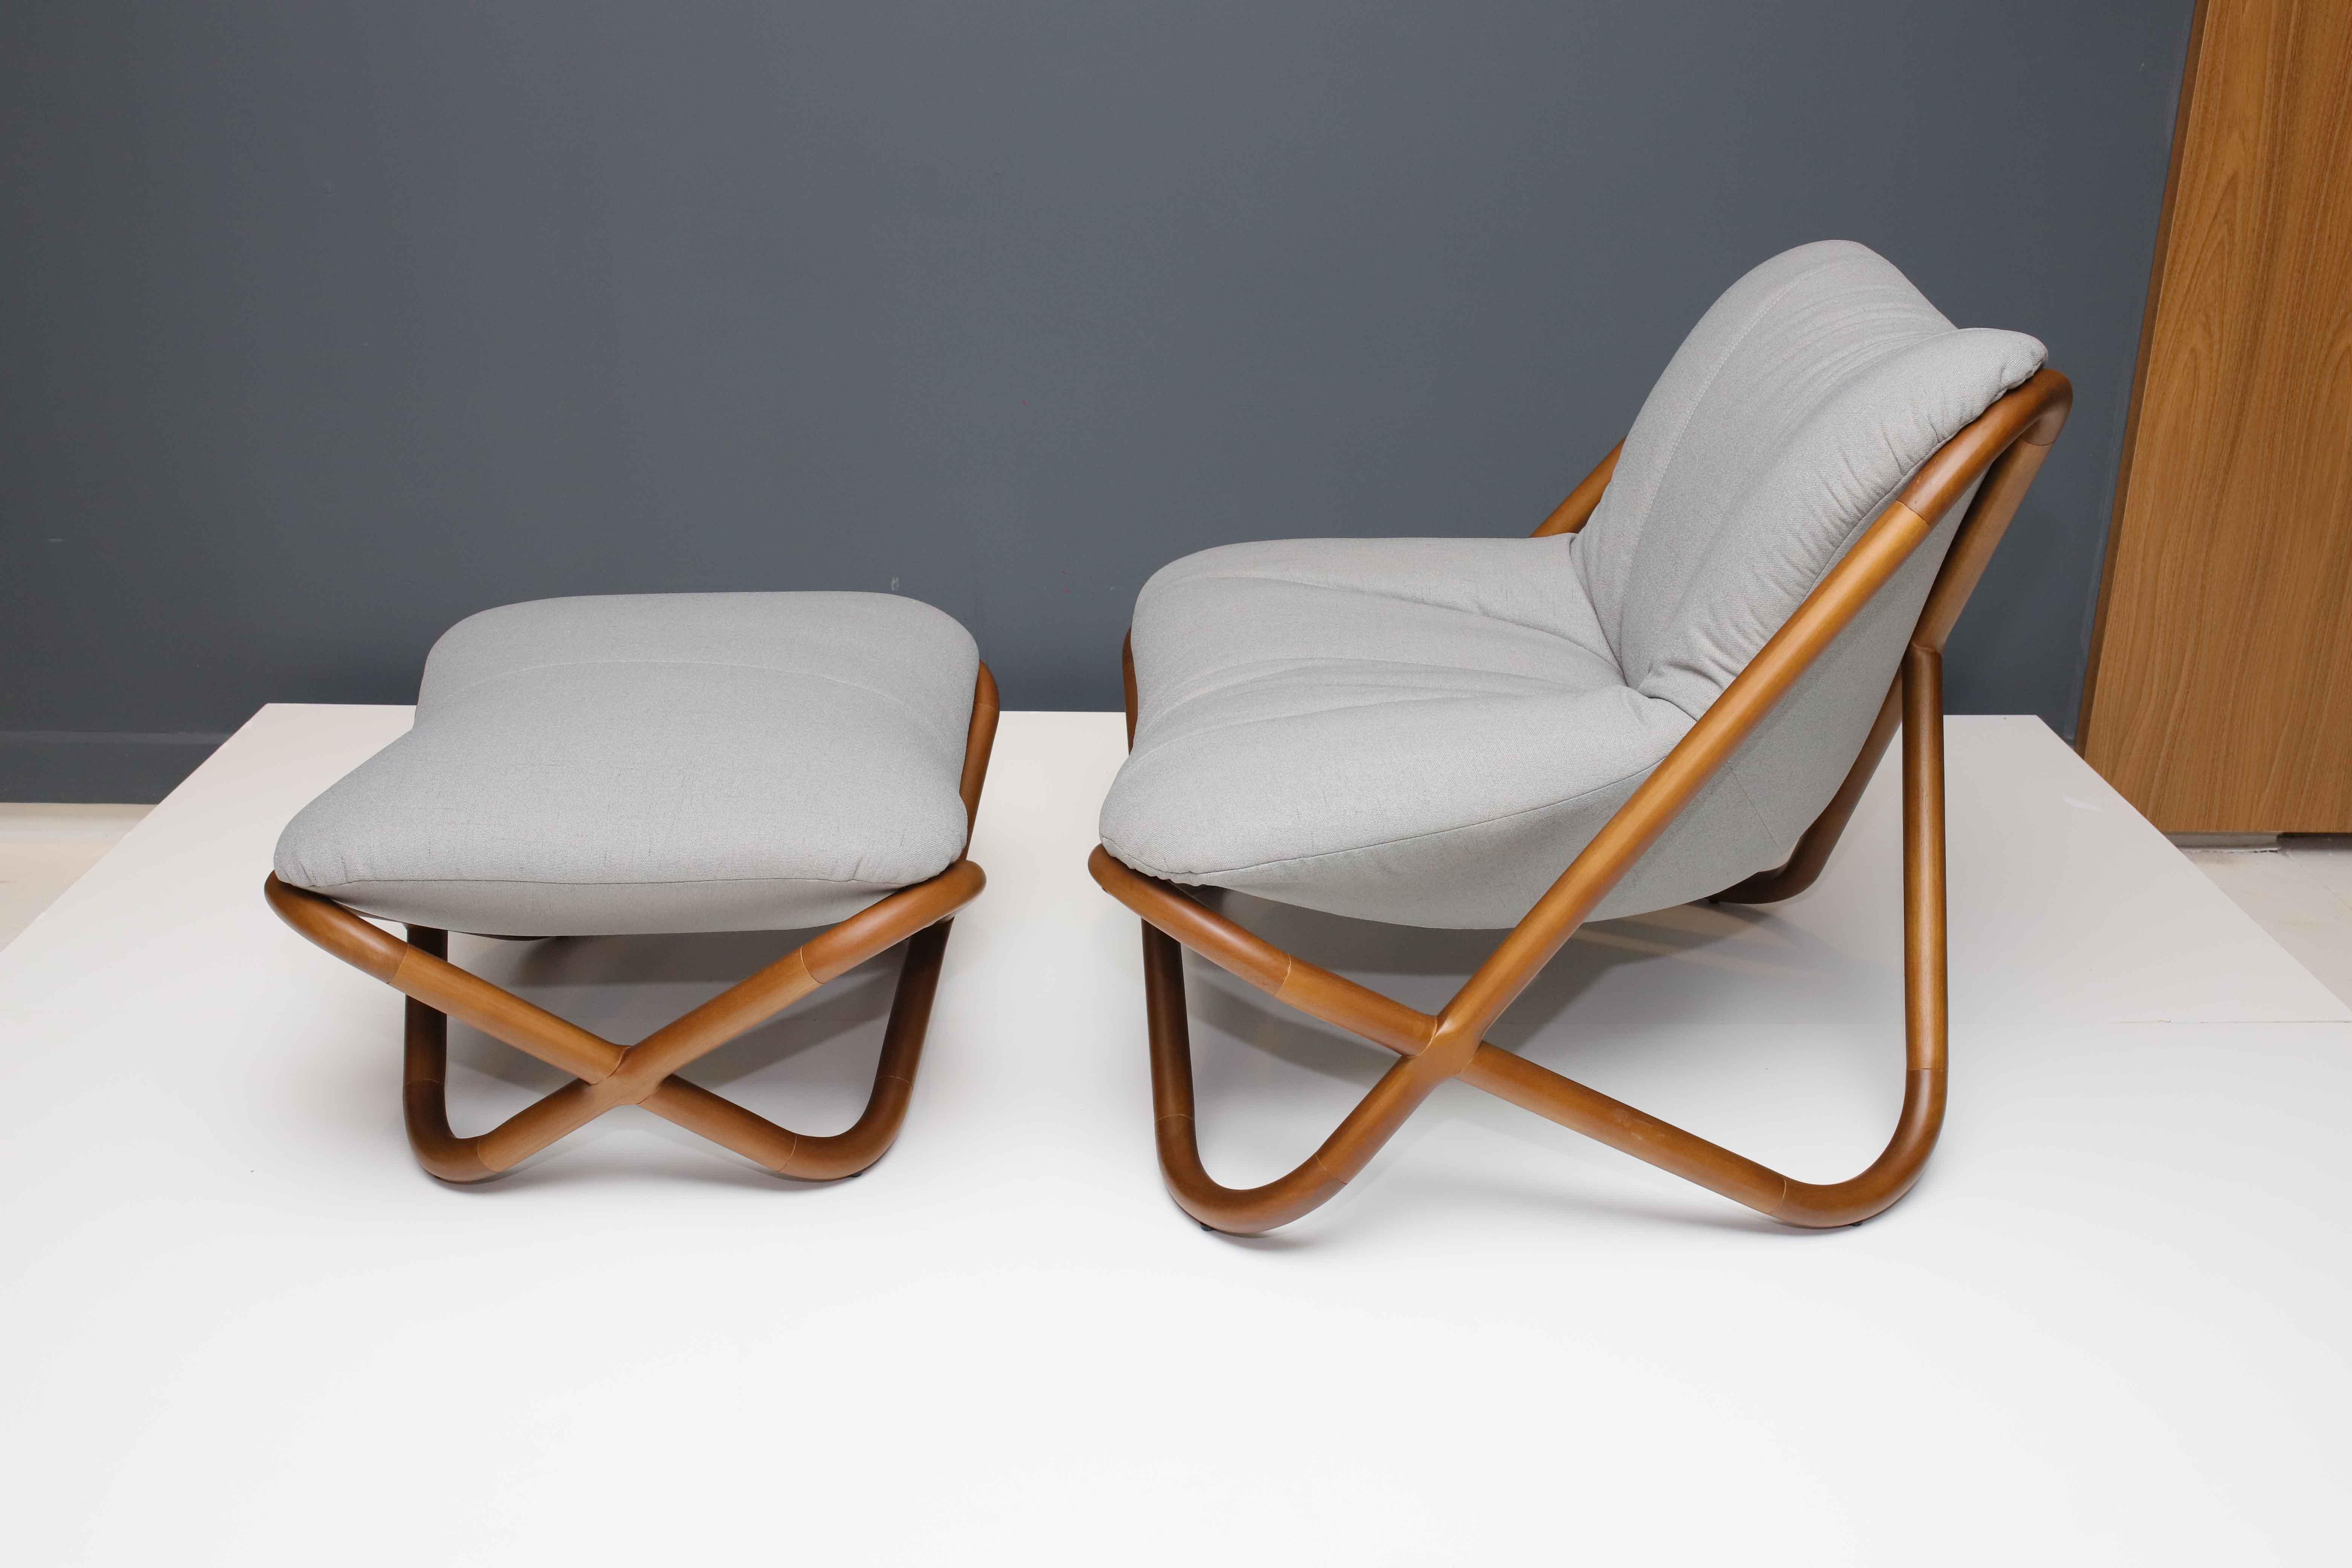 Armchair with structure in solid wood and upholstered fiberglass.
Armchair + stool

The “Astral” armchair is Lattoog's latest release for Empório das Cadeiras and is the youngest of a family of furniture affectionately baptized by the designers